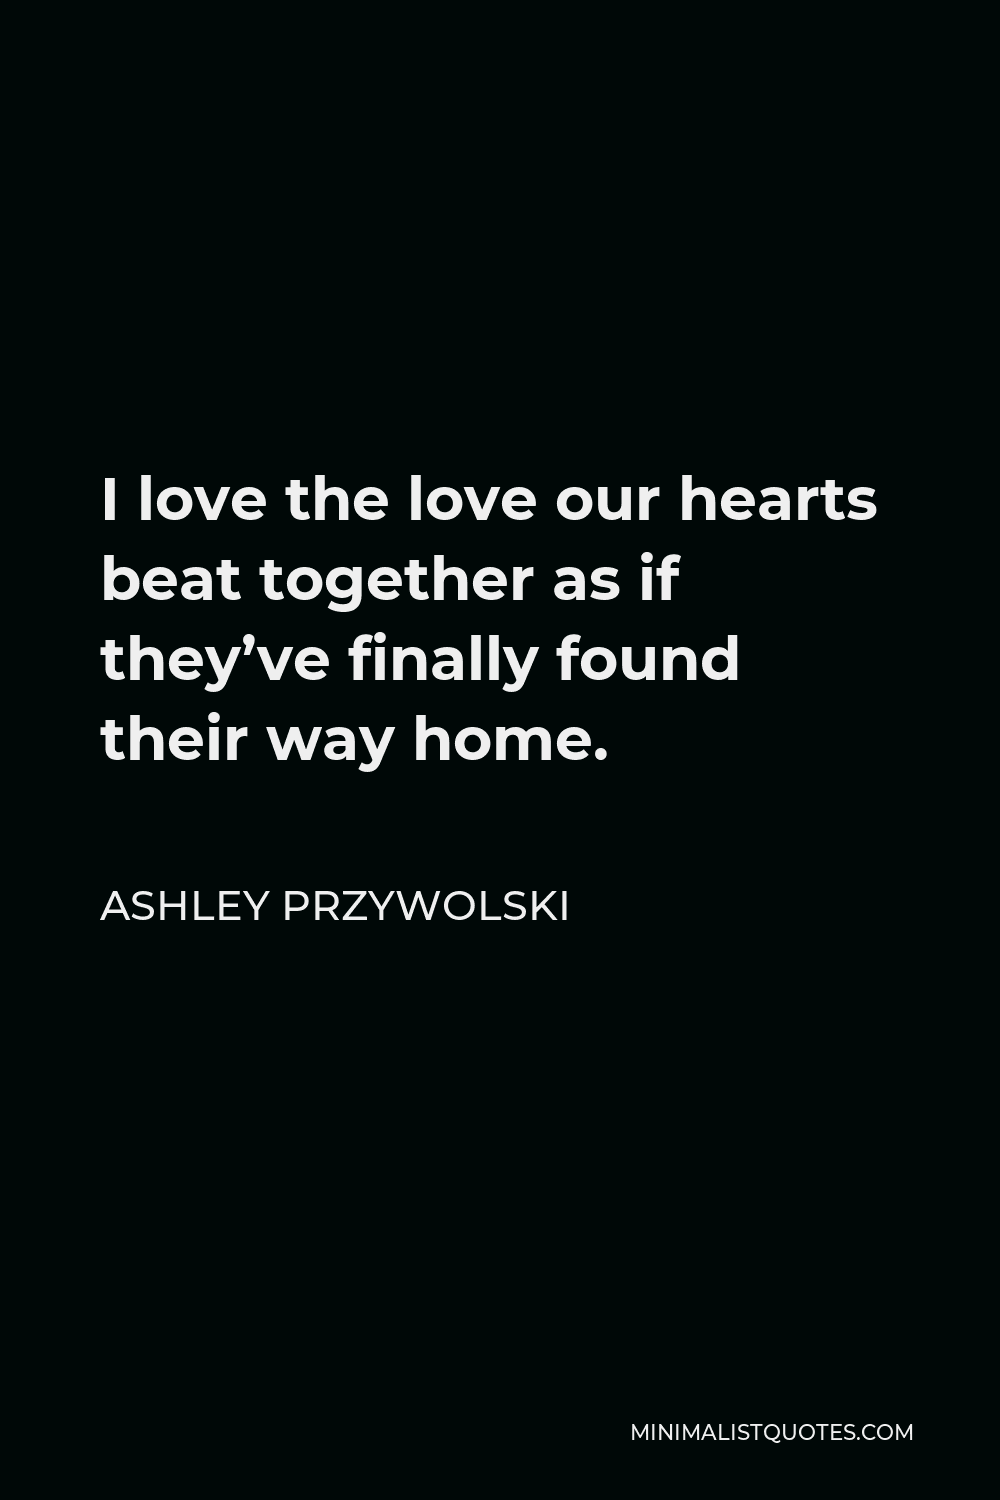 Ashley Przywolski Quote - I love the love our hearts beat together as if they’ve finally found their way home.